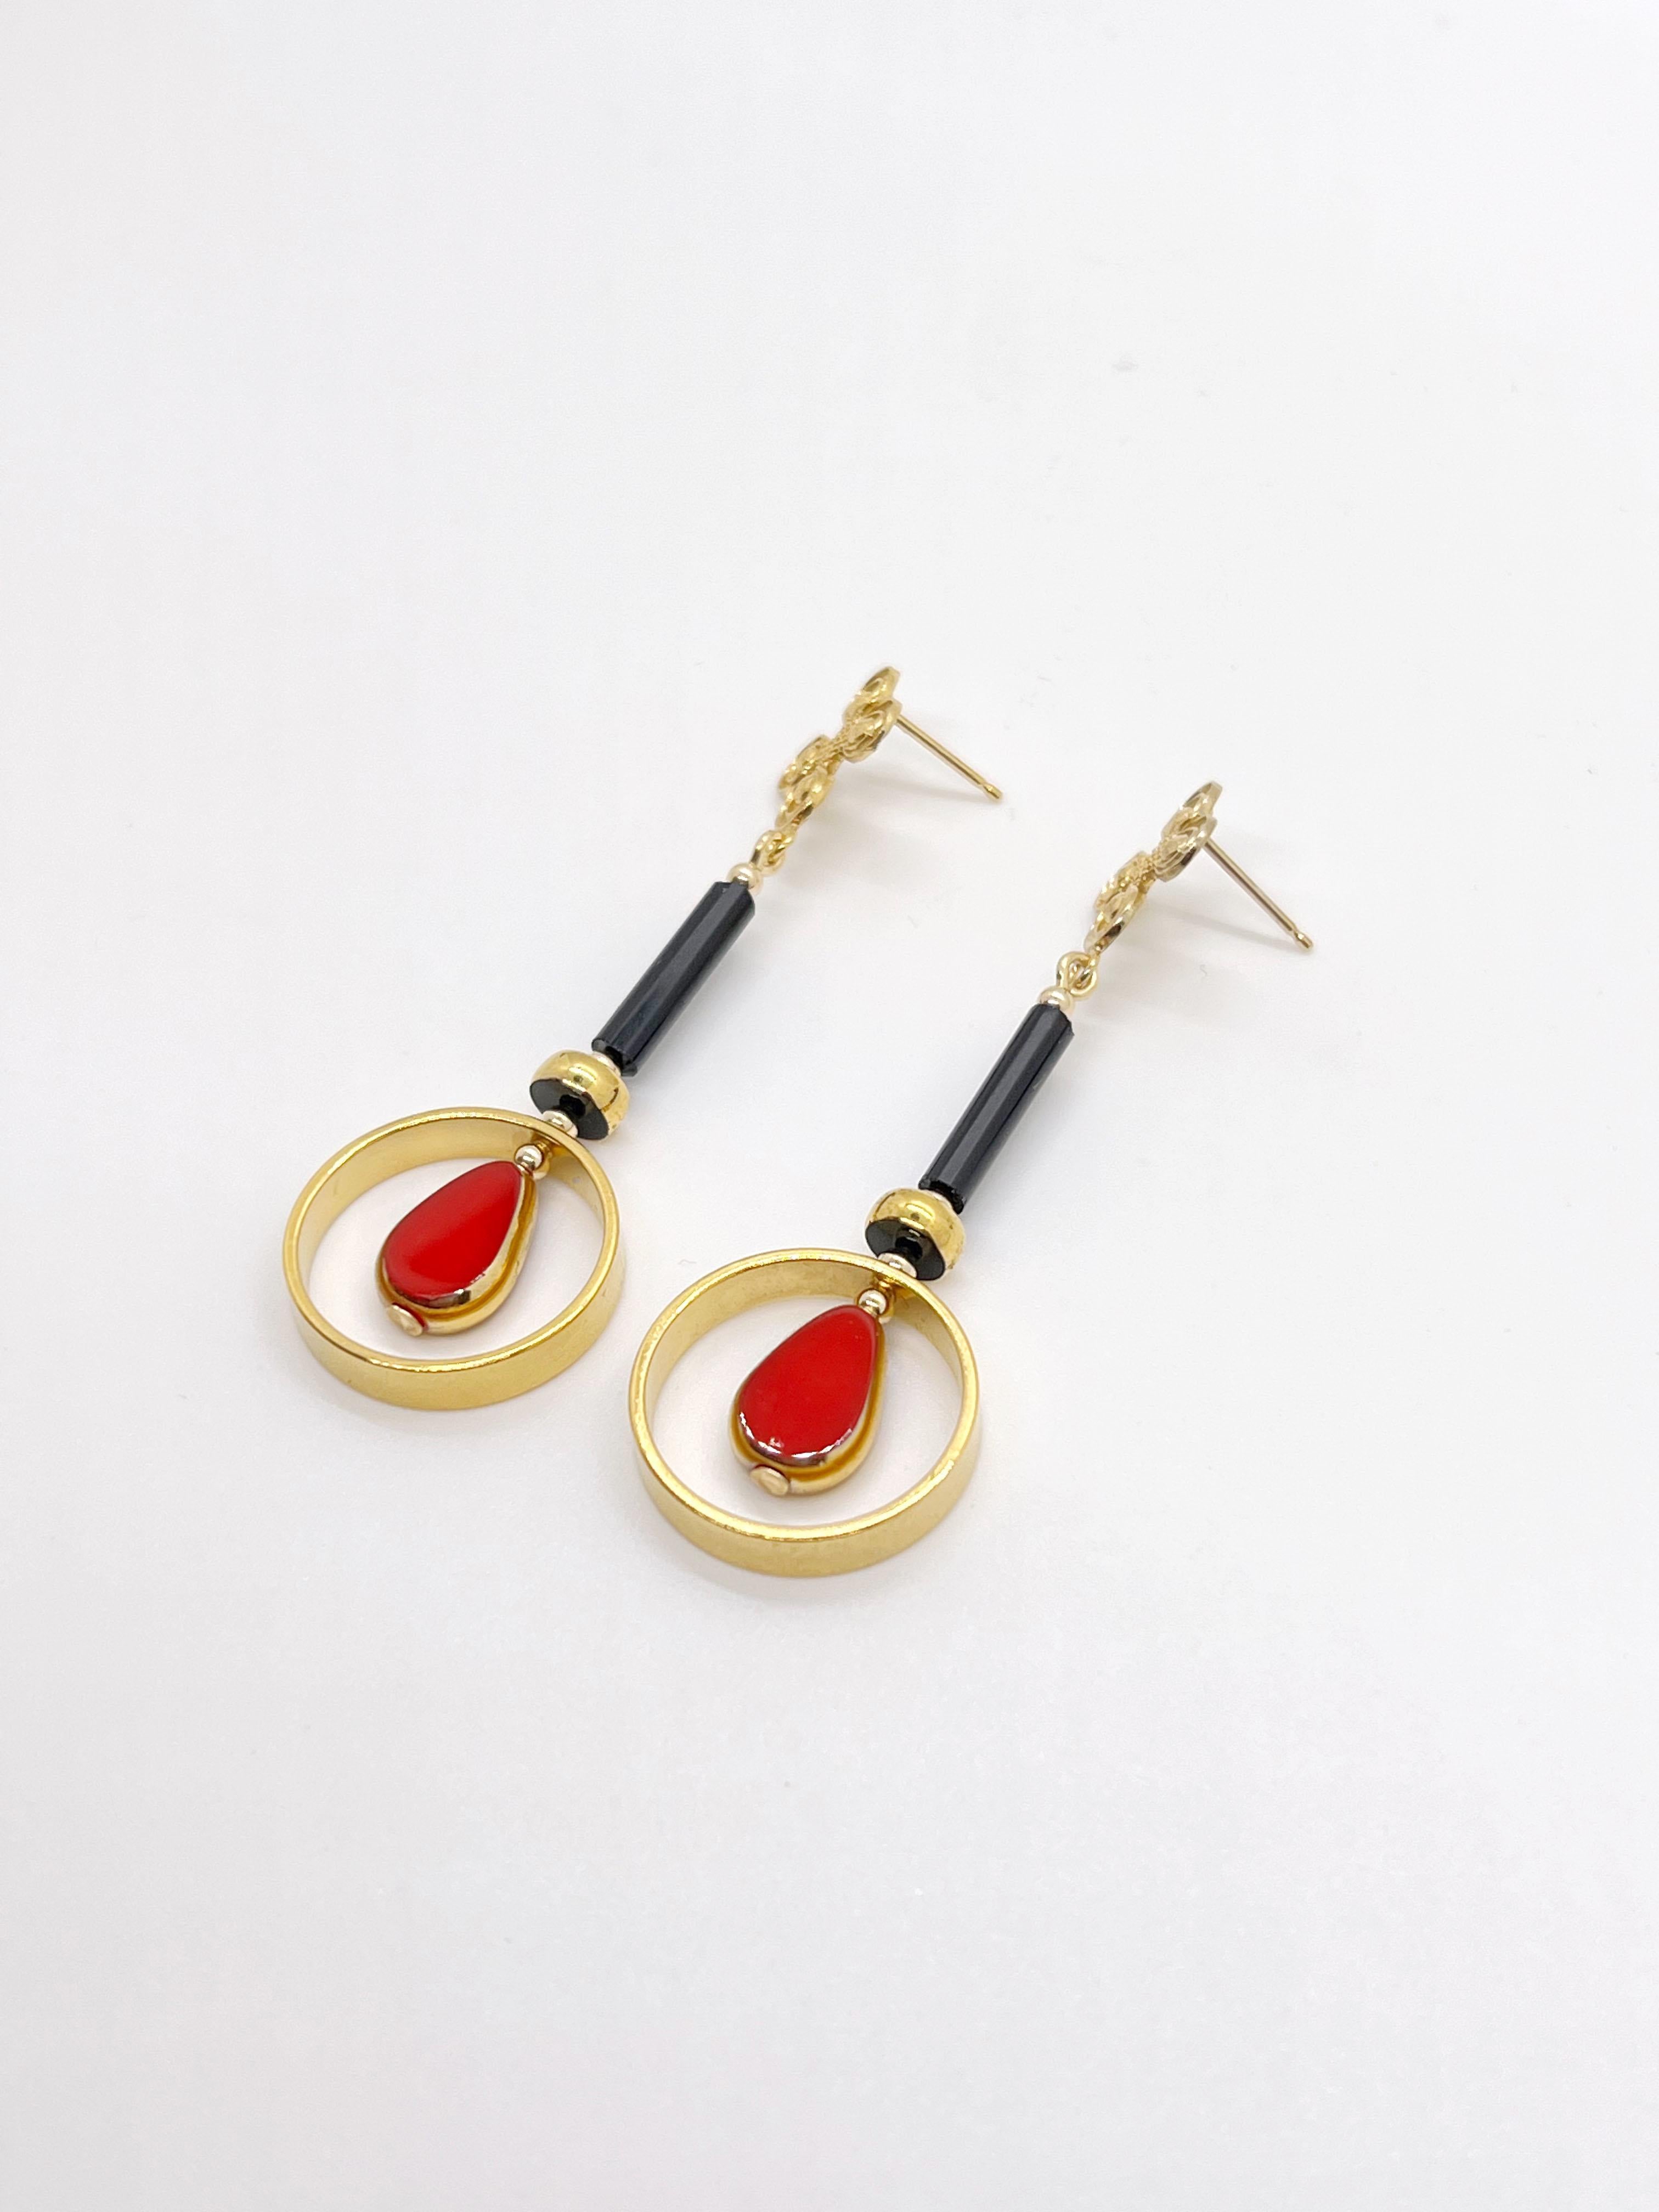 Red Teardrop vintage German glass beads edged with gold, brass metal plated with 24K gold,  black glass bugle bead, gold-filled findings and ear needle. 

The German vintage glass beads are considered rare and collectible, circa 1920s-1960s.

*Our